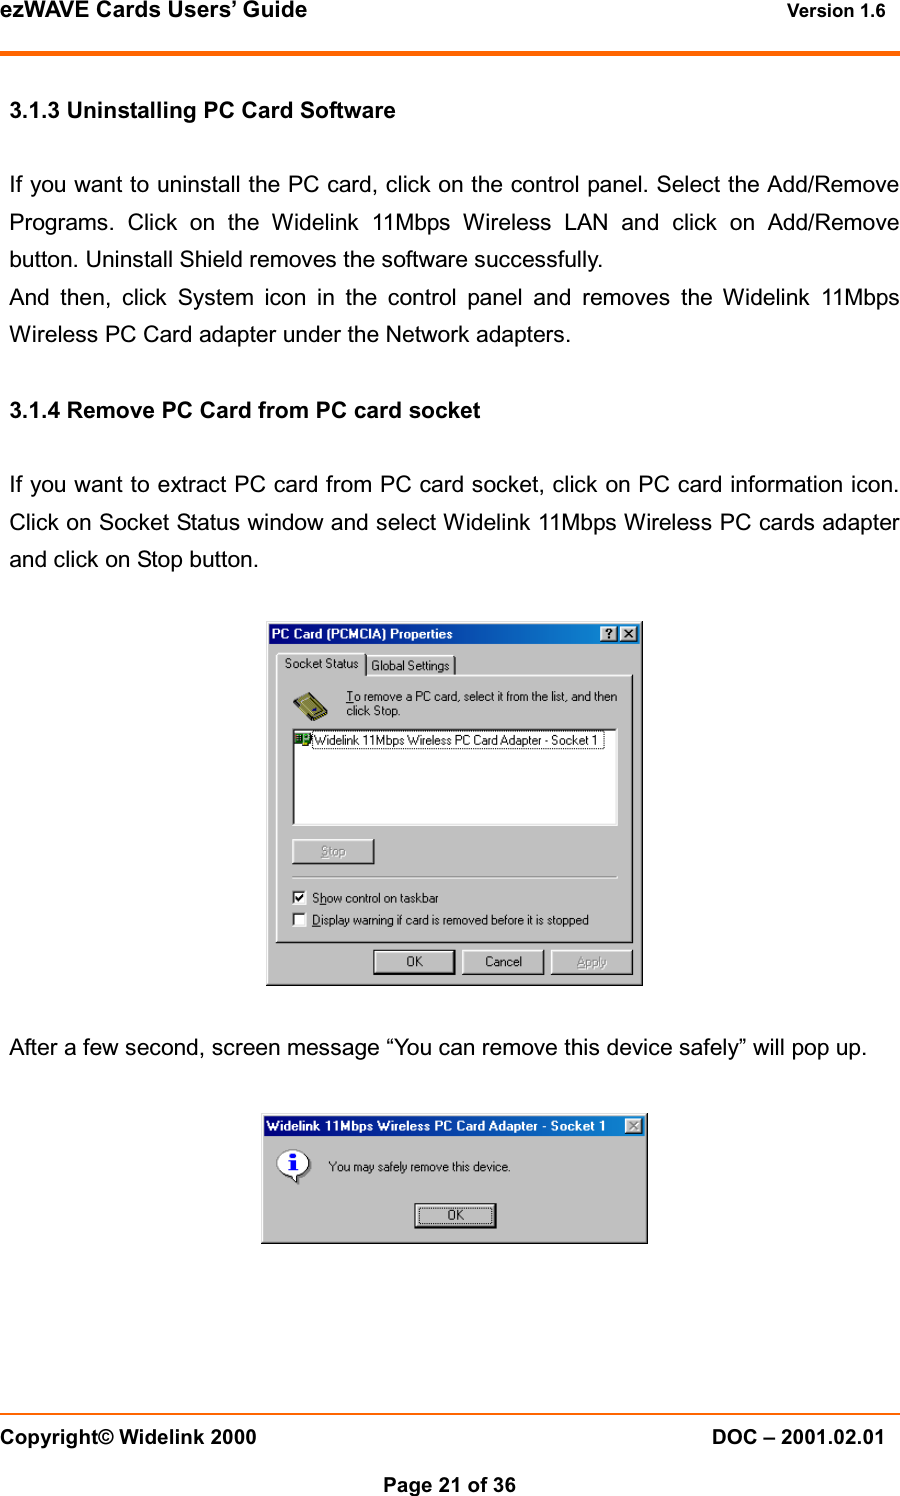 ezWAVE Cards Users’ Guide Version 1.6 Copyright© Widelink 2000 DOC – 2001.02.01Page 21 of 36 3.1.3 Uninstalling PC Card SoftwareIf you want to uninstall the PC card, click on the control panel. Select the Add/RemovePrograms. Click on the Widelink 11Mbps Wireless LAN and click on Add/Removebutton. Uninstall Shield removes the software successfully.And then, click System icon in the control panel and removes the Widelink 11MbpsWireless PC Card adapter under the Network adapters.3.1.4 Remove PC Card from PC card socketIf you want to extract PC card from PC card socket, click on PC card information icon.Click on Socket Status window and select Widelink 11Mbps Wireless PC cards adapterand click on Stop button.After a few second, screen message “You can remove this device safely” will pop up.